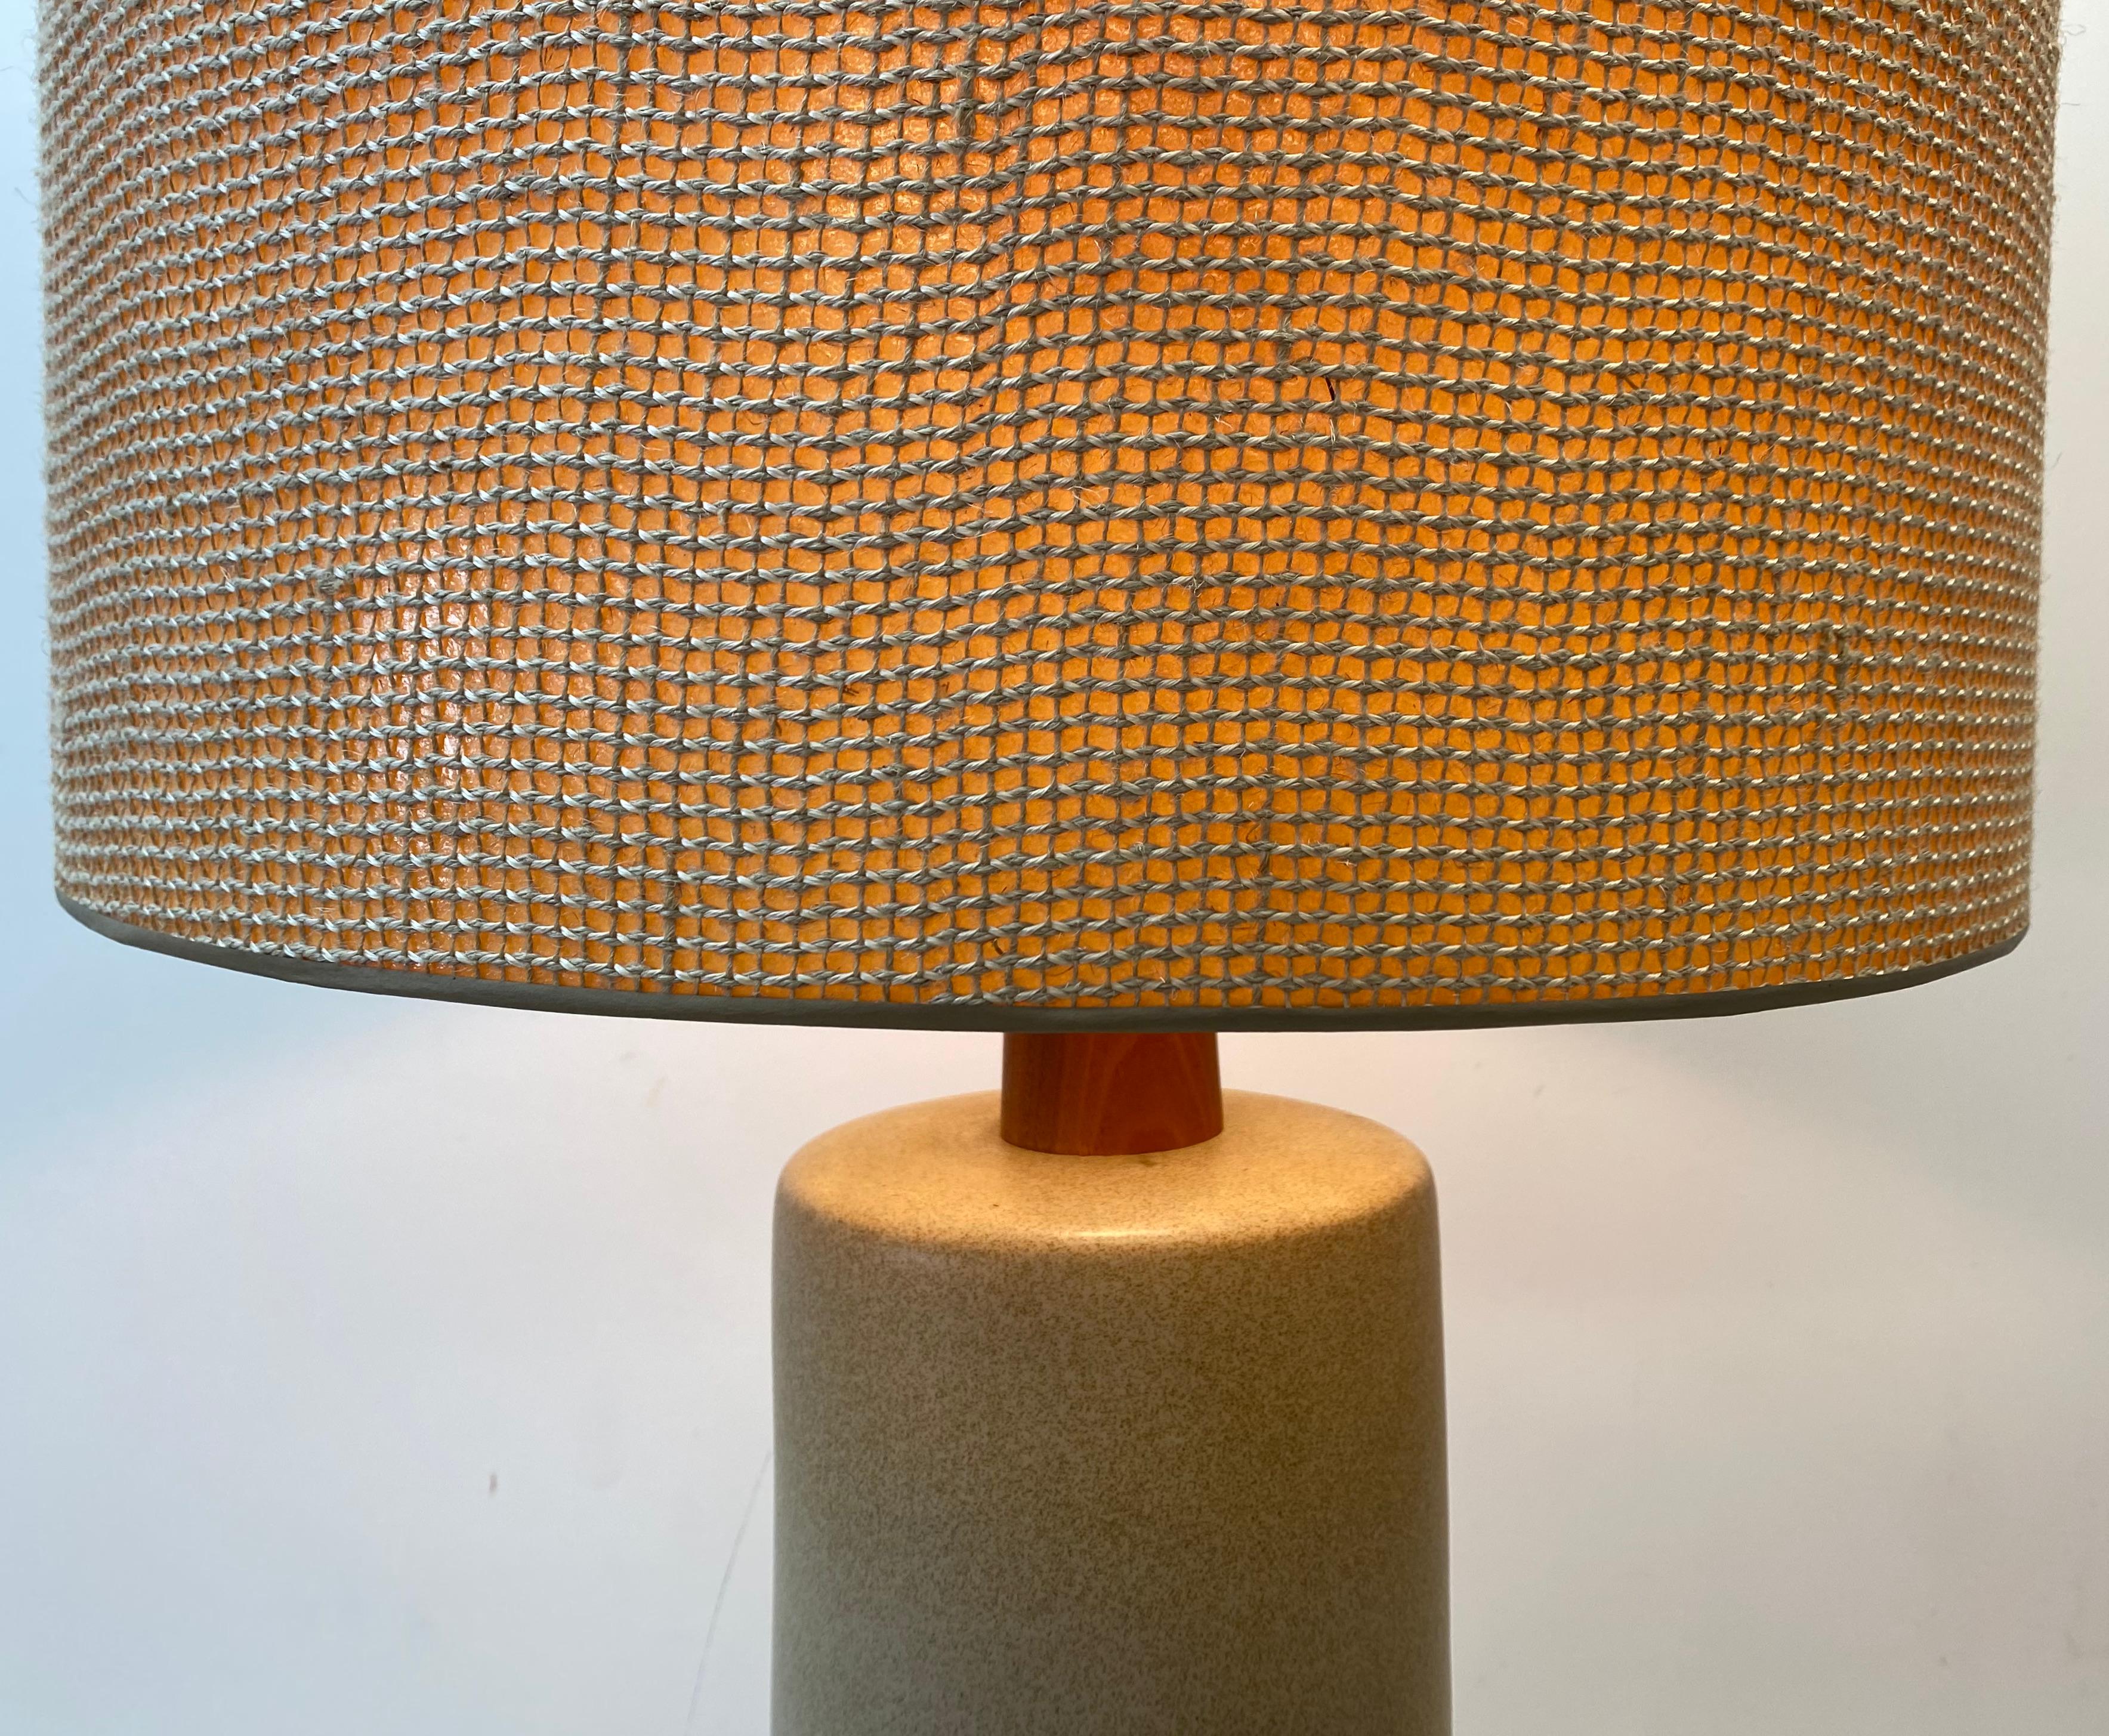 Martz Malt glaze large scale table lamp with shade, C.1960

Classic mid century table lamp by Martz

The lamp has a handsome malt glaze with a beautiful period shade

Both the lamp and shade are in very good condition

8.5